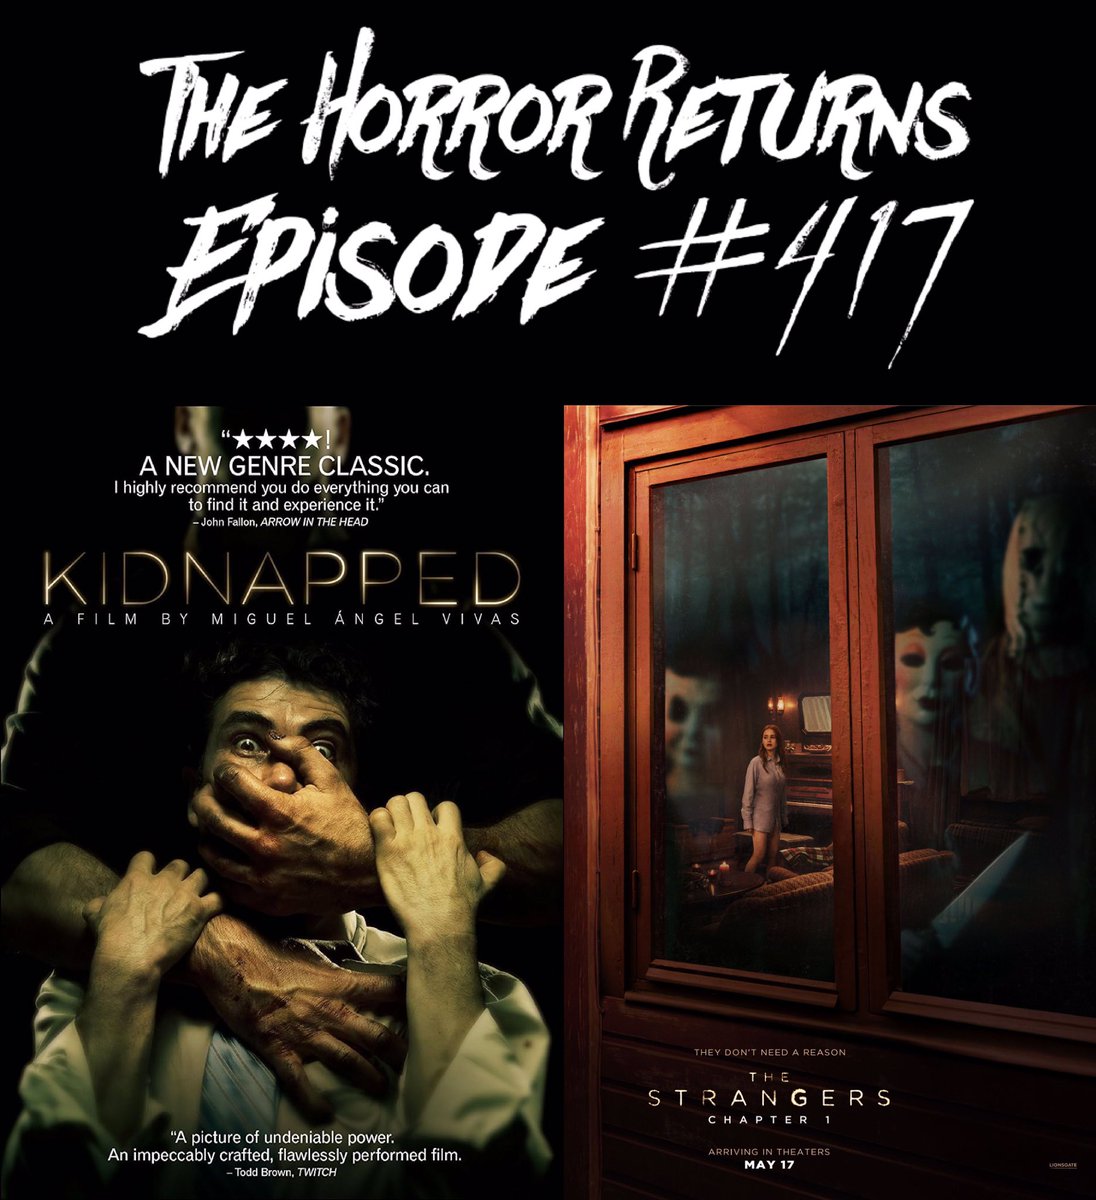 #TheHorrorReturns - Ep. #417: #Kidnapped (2010) & #TheStrangersChapter1 (2024) Is Now Available At thehorrorreturns.com. #THRPodcastNetwork #Horror #HorrorFamily #HorrorCommunity #HorrorPodcast #Podcast #Podcasting #PodLife #PodernFamily #PodcastHQ #PodNation #MutantFam